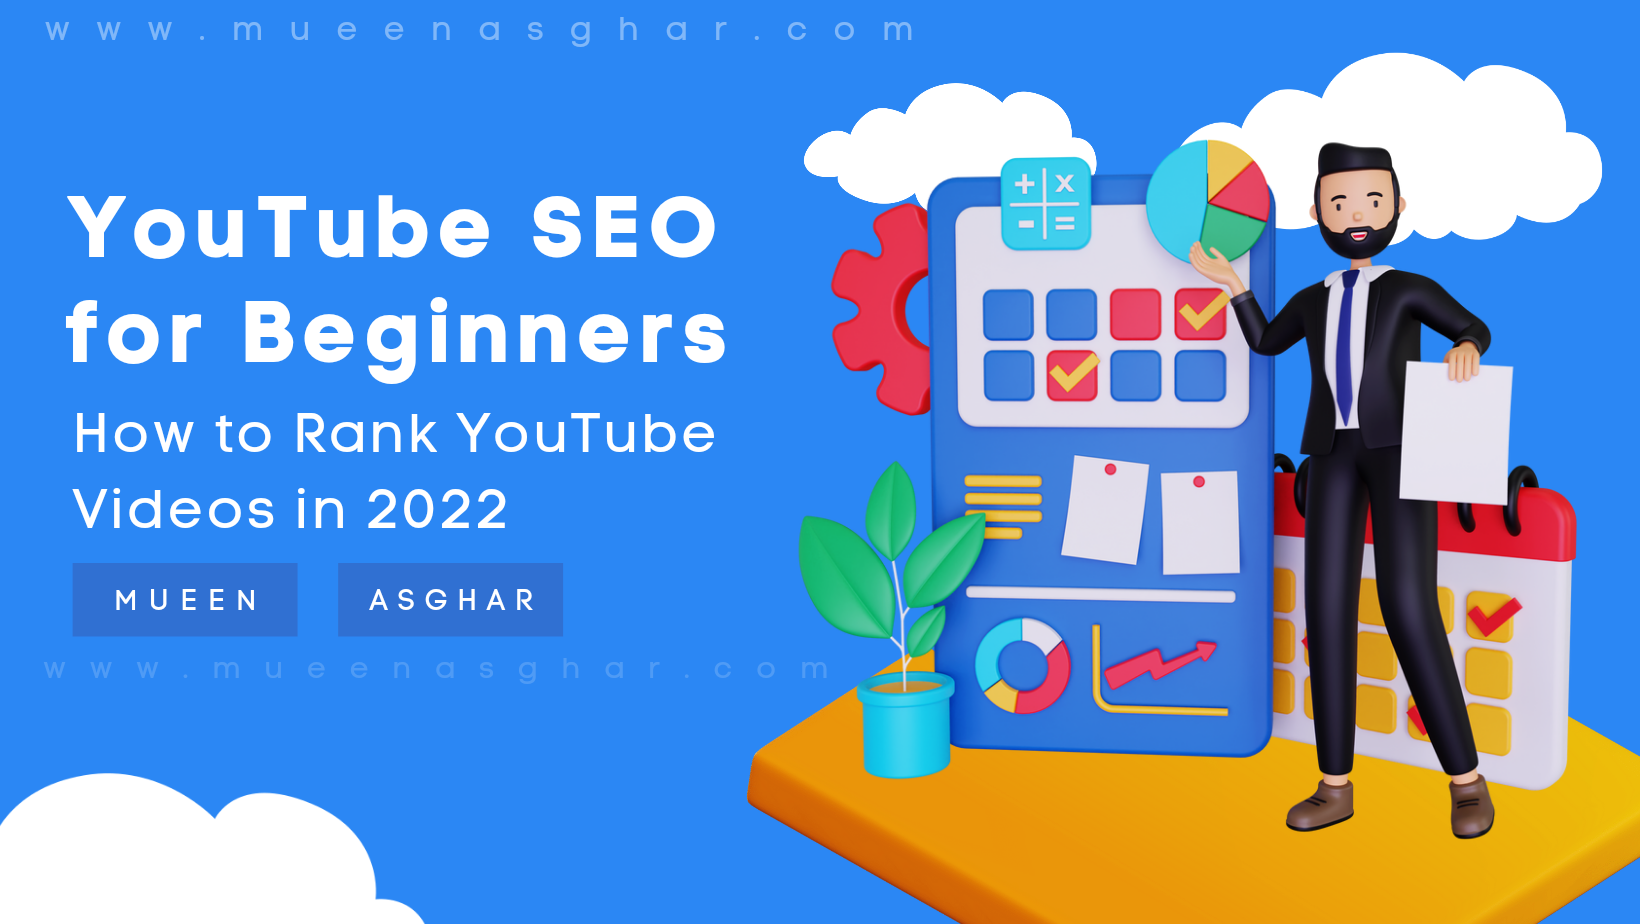 YouTube SEO for Beginners - How to Rank YouTube Videos in 2022